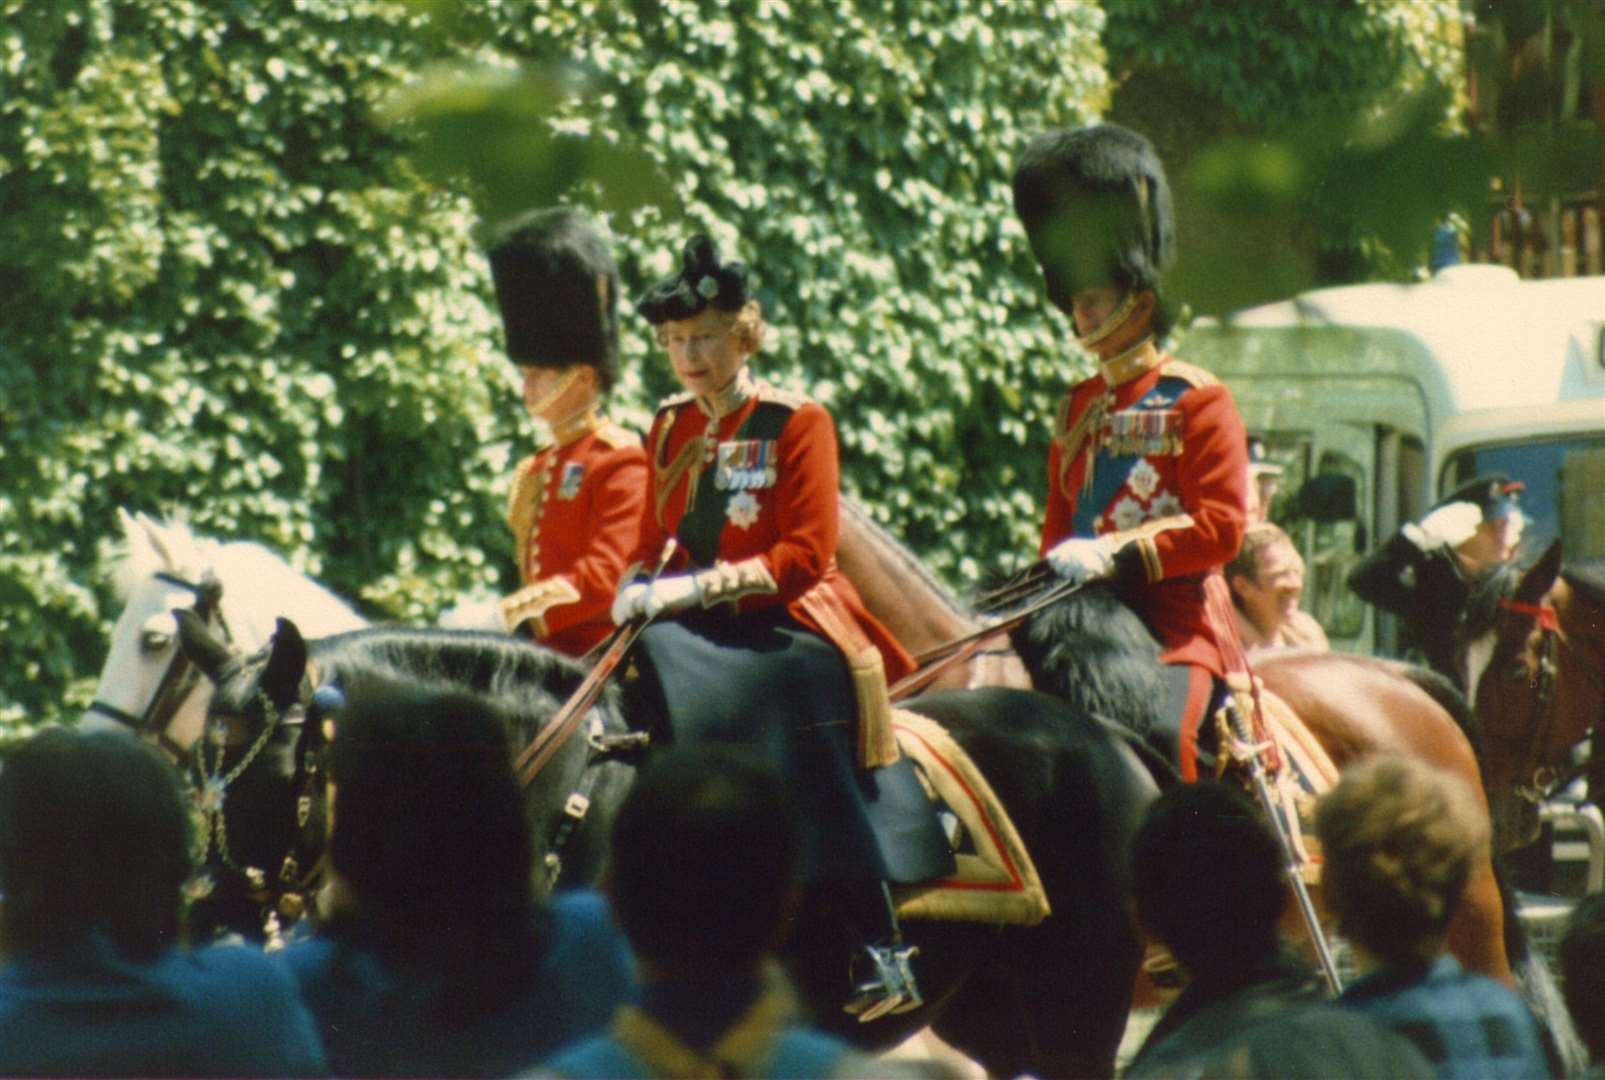 The Queen during the Trooping of the Colour in the 1980s